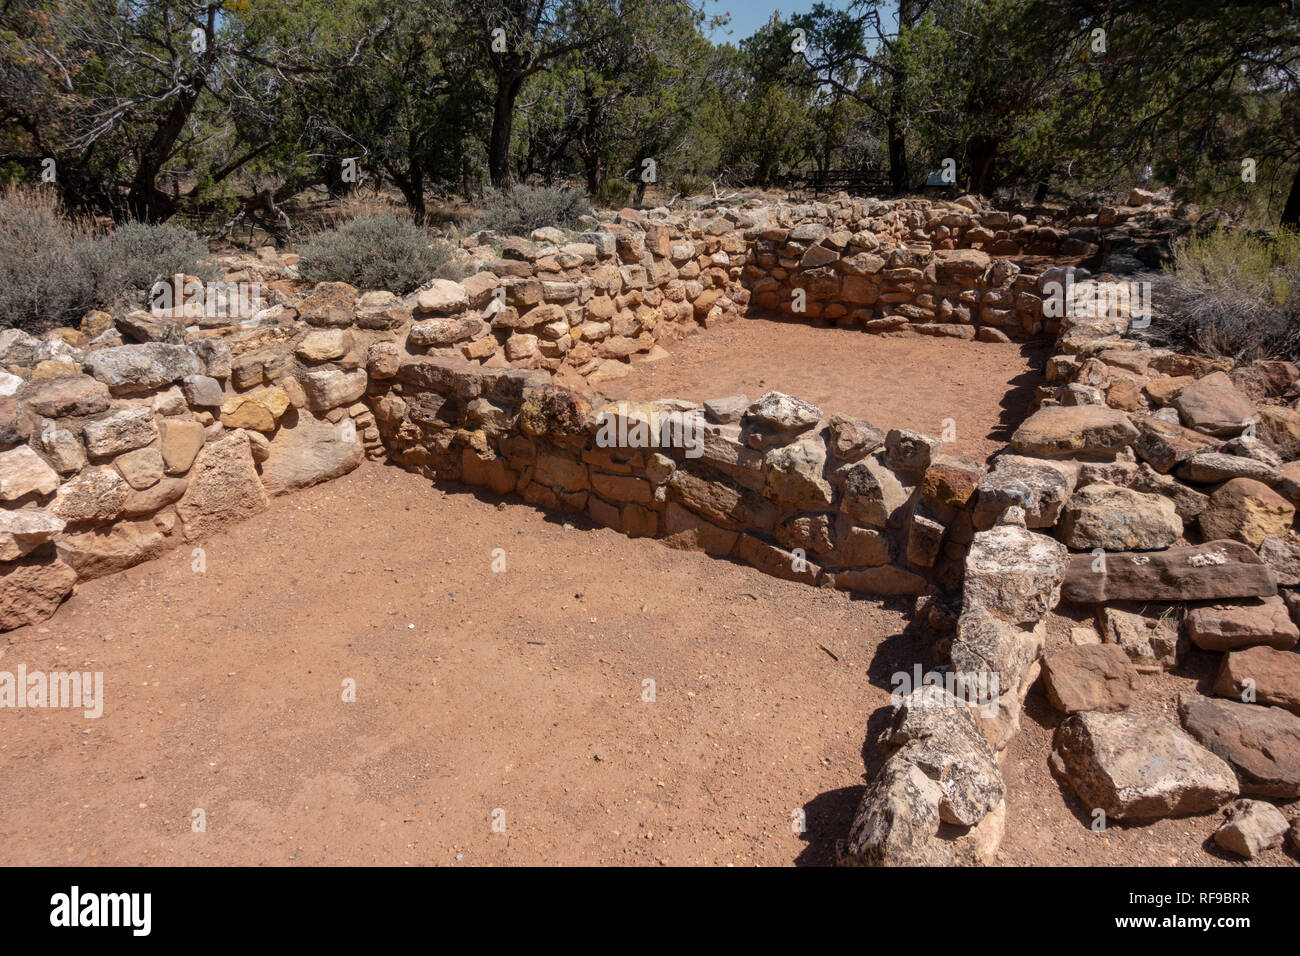 View over the living quarters area of the Tusayan Ruins (or Tusayan Pueblo) in the Grand Canyon National Park, Arizona, USA. Stock Photo